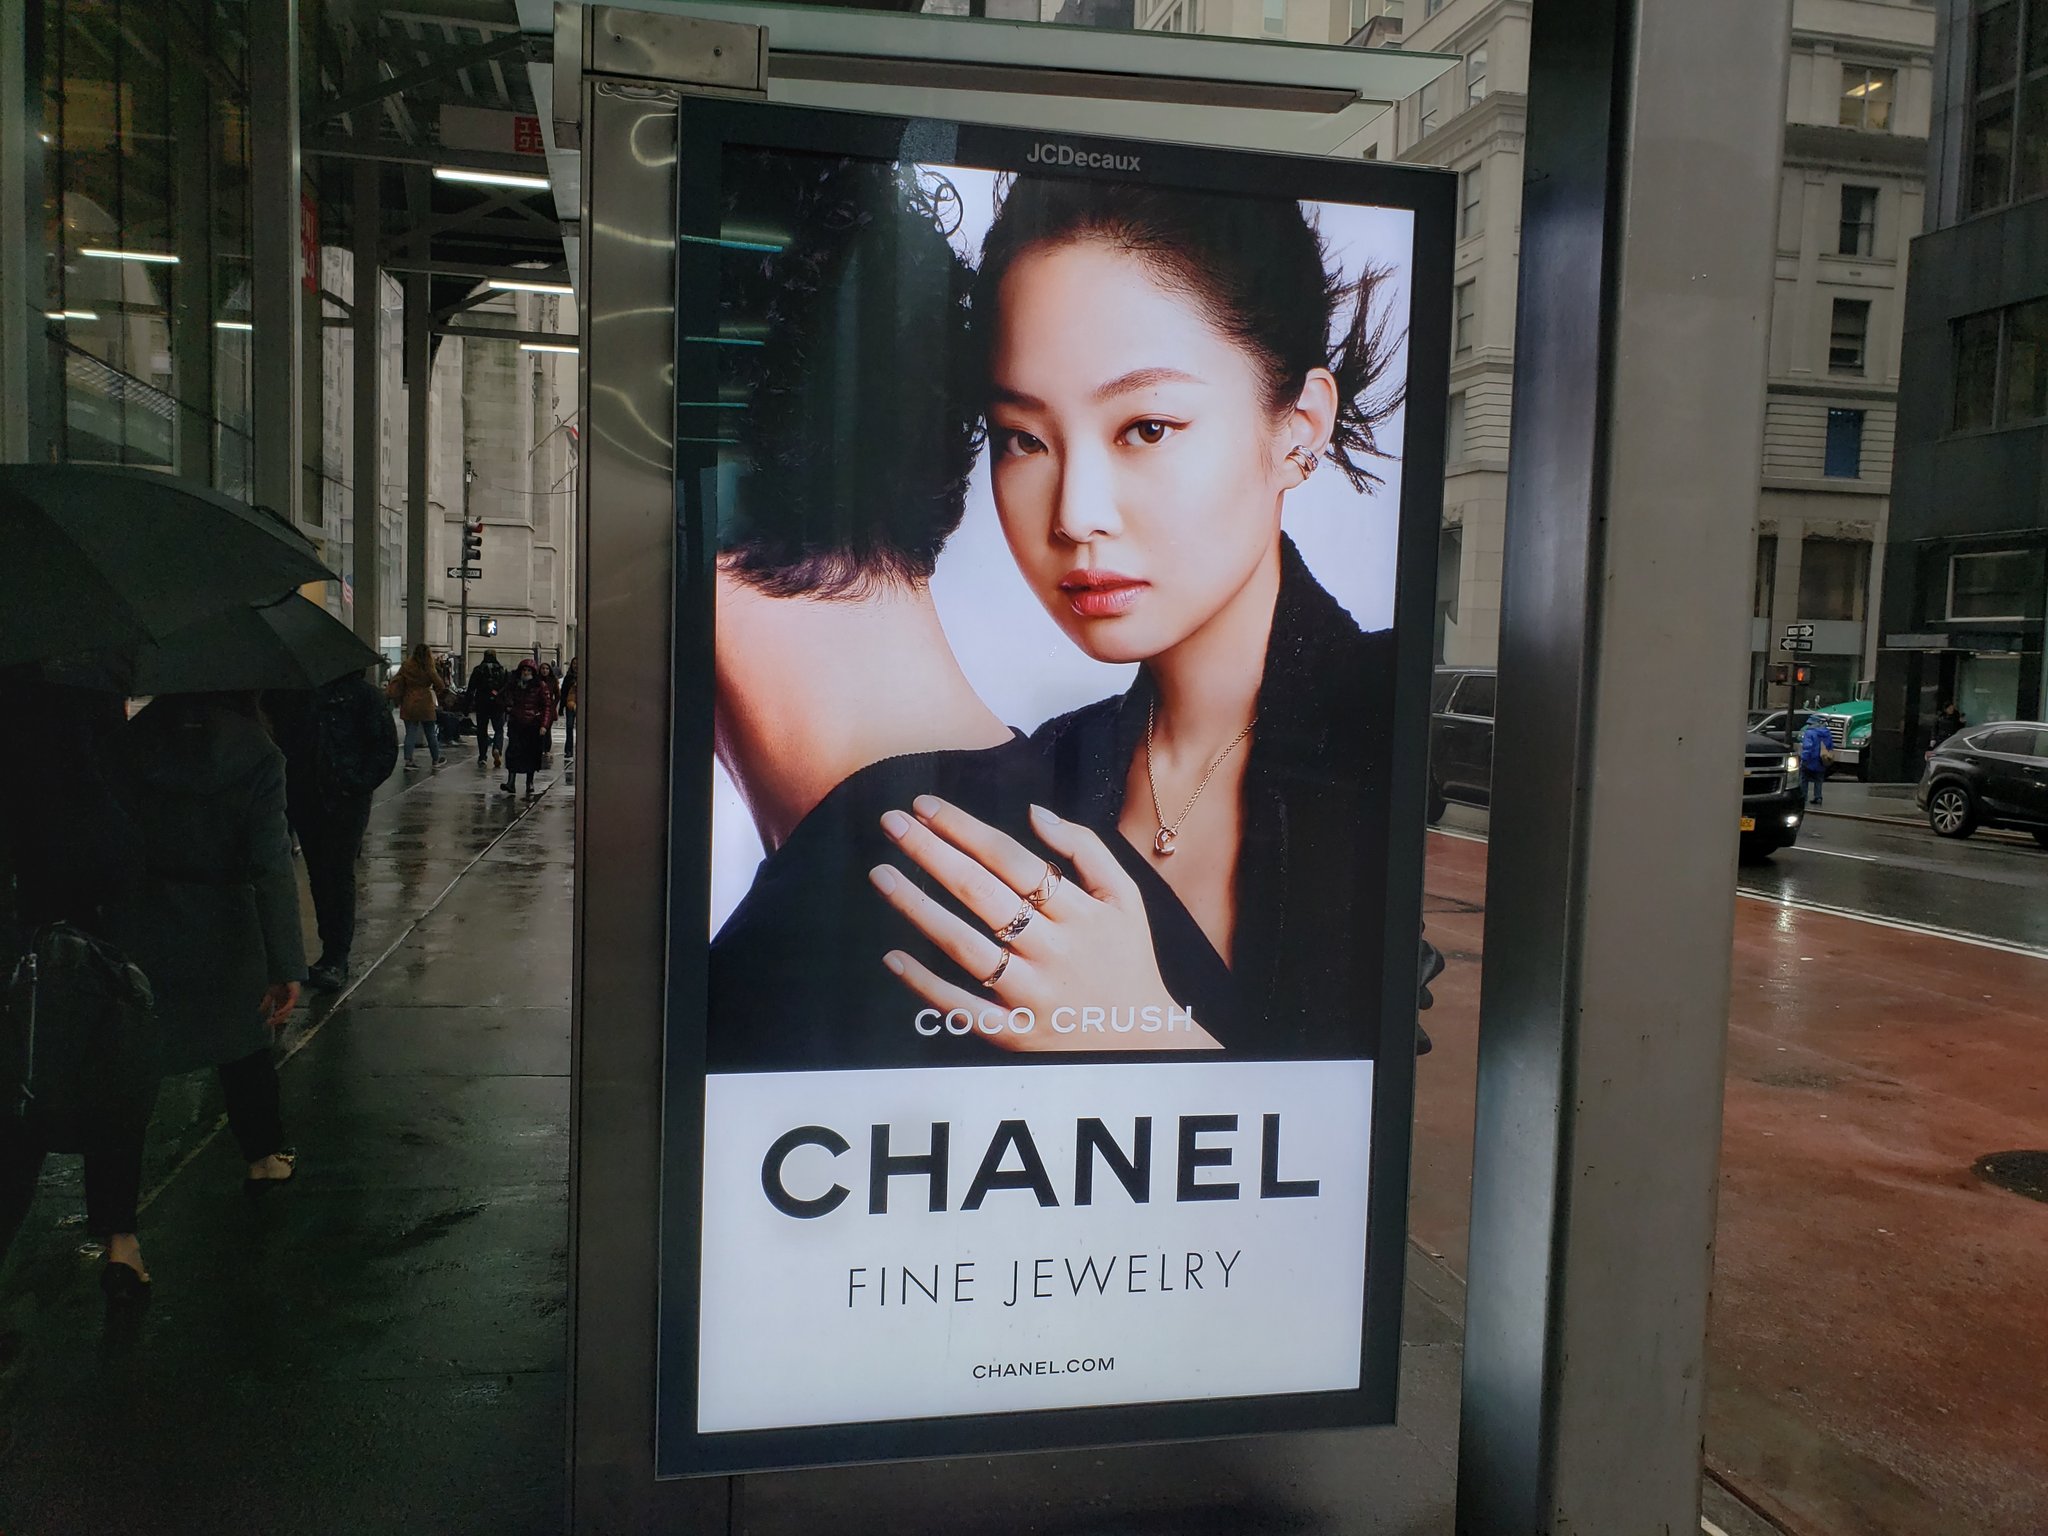 John Jainschigg on X: 53rd and Fifth Avenue, NYC. 김제니 (Jennie Kim) of # BLACKPINK is apparently a global Chanel ambassador. Good to see the corps  diplo still has standards in the post-Trump